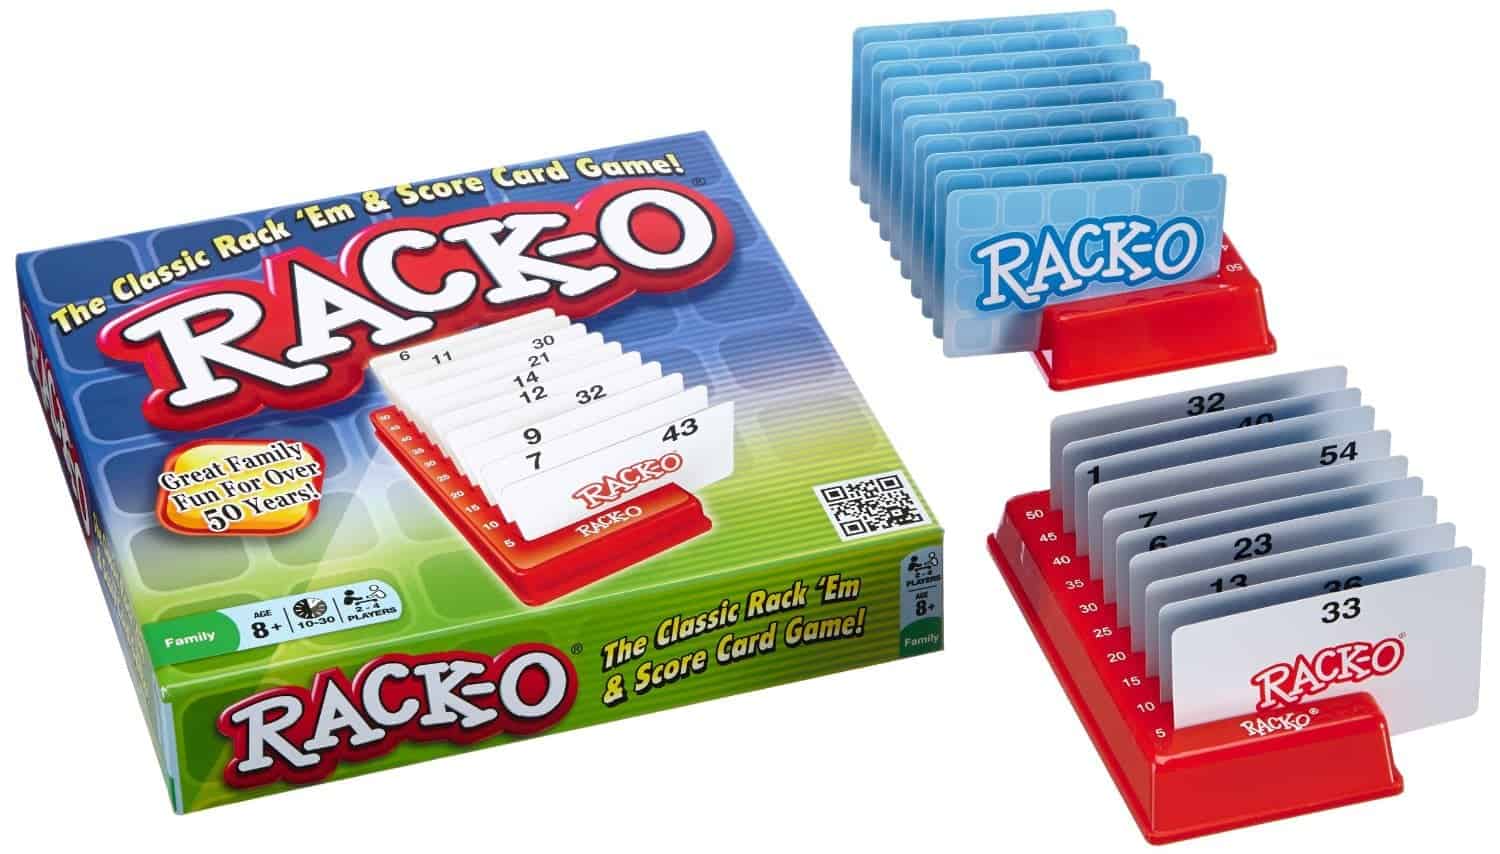 10+ Amazing Card Games for your Family: Rack O | www.thepinningmama.com